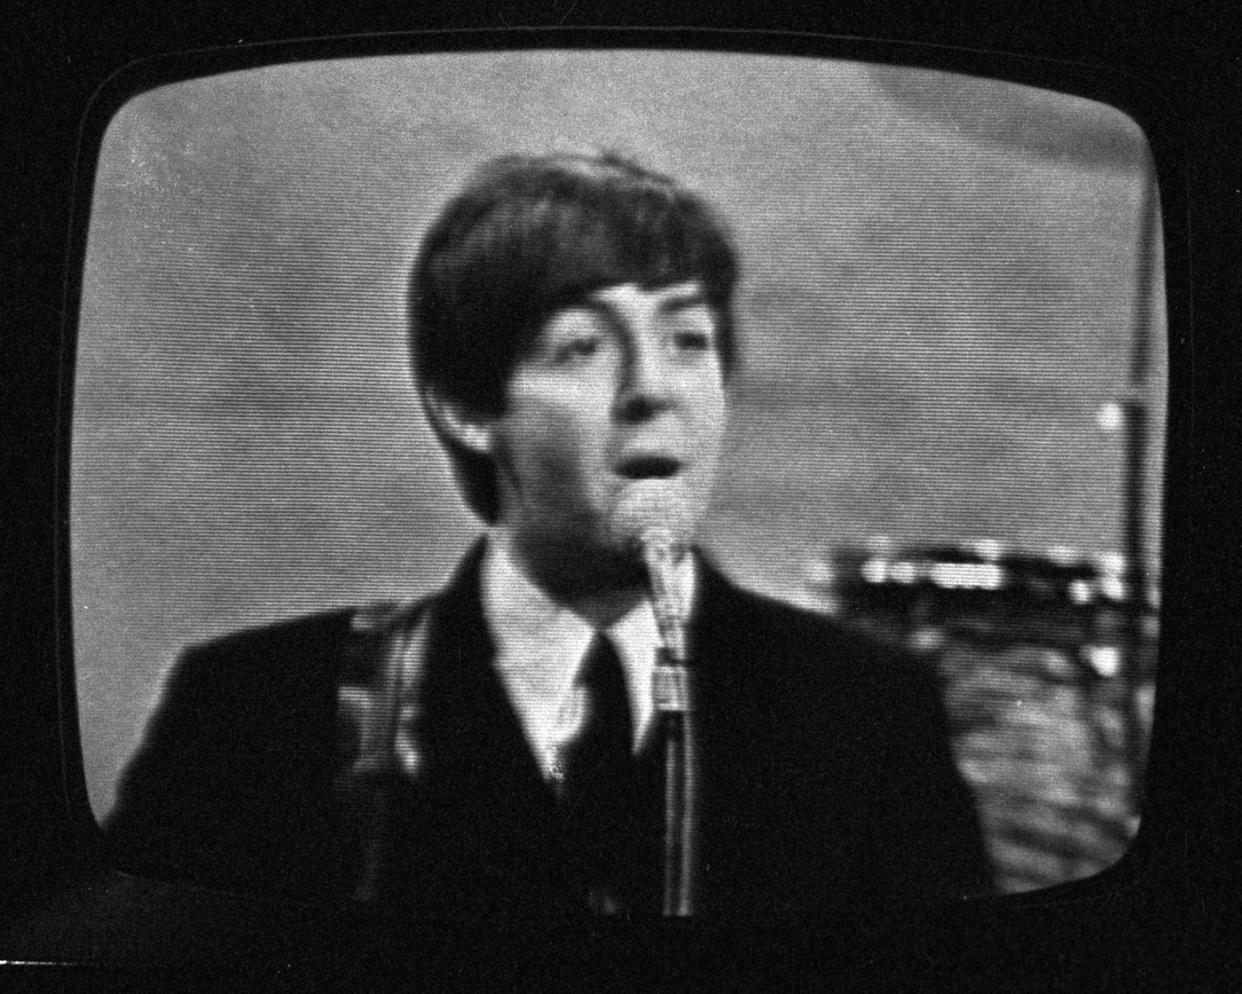 Tom Weschler snapped shots of the Beatles' performances on "The Ed Sullivan Show" in February 1964, including this with Paul McCartney.